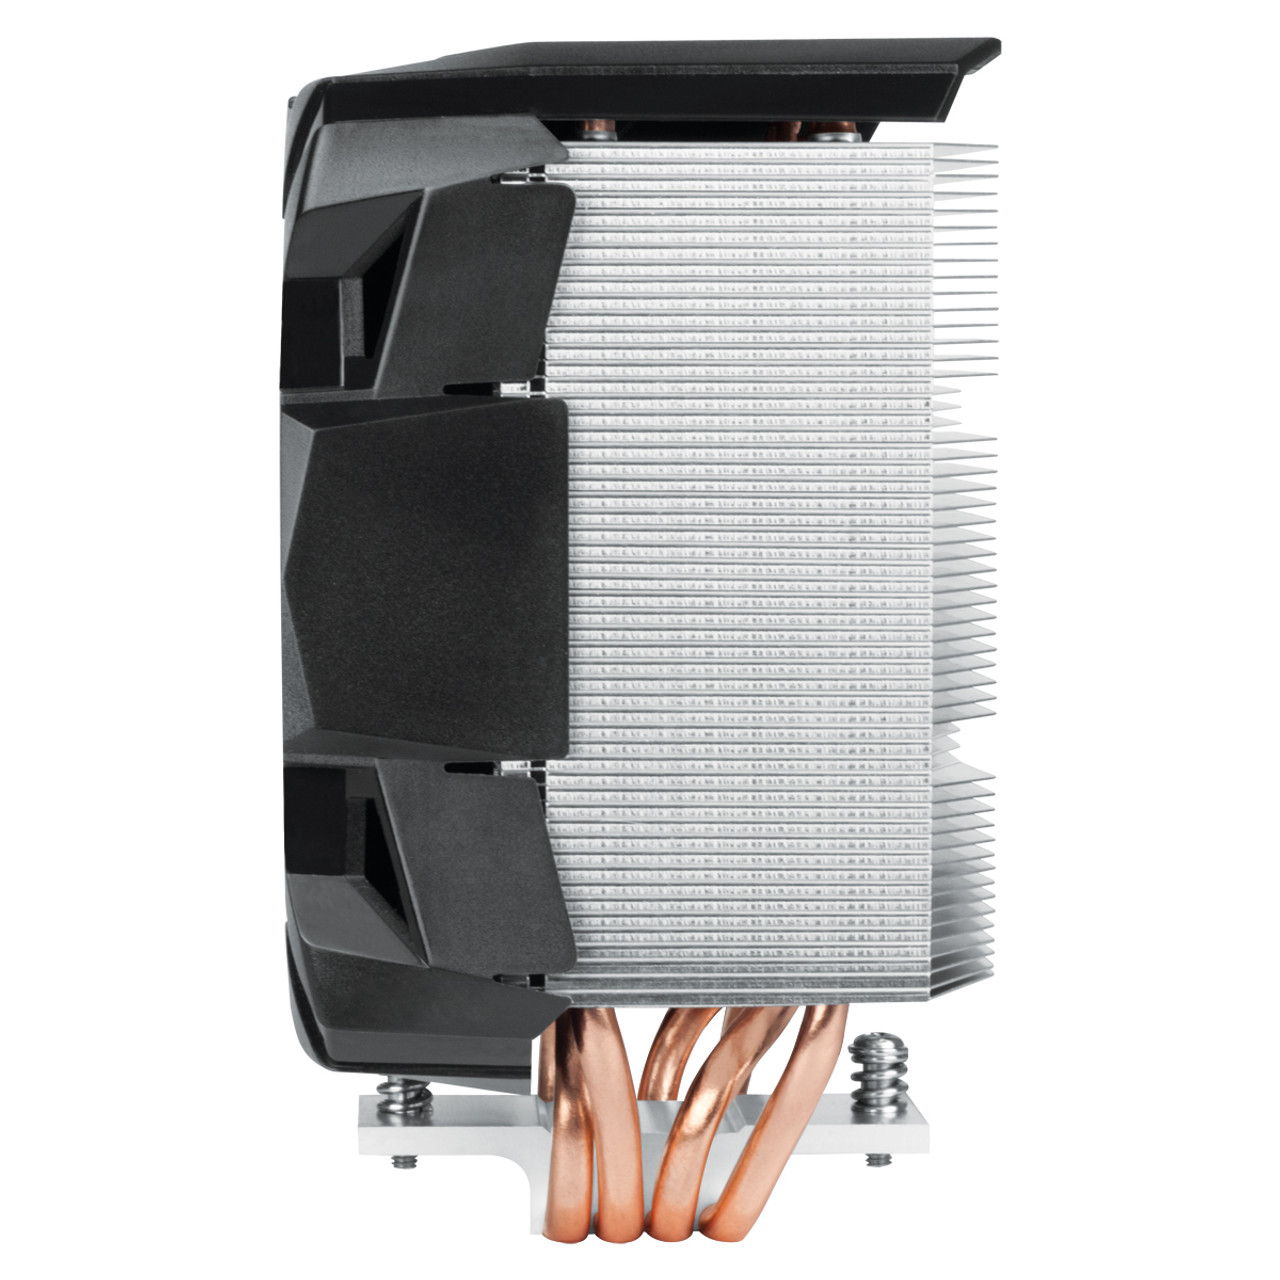 Arctic ACFRE00094A Freezer i35 - Single Tower CPU Cooler, Intel specific, Pressure optimized 120 mm P-fan, 0-1800 RPM, 4 Heat Pipes, incl. MX-5 Thermal Paste (Black)